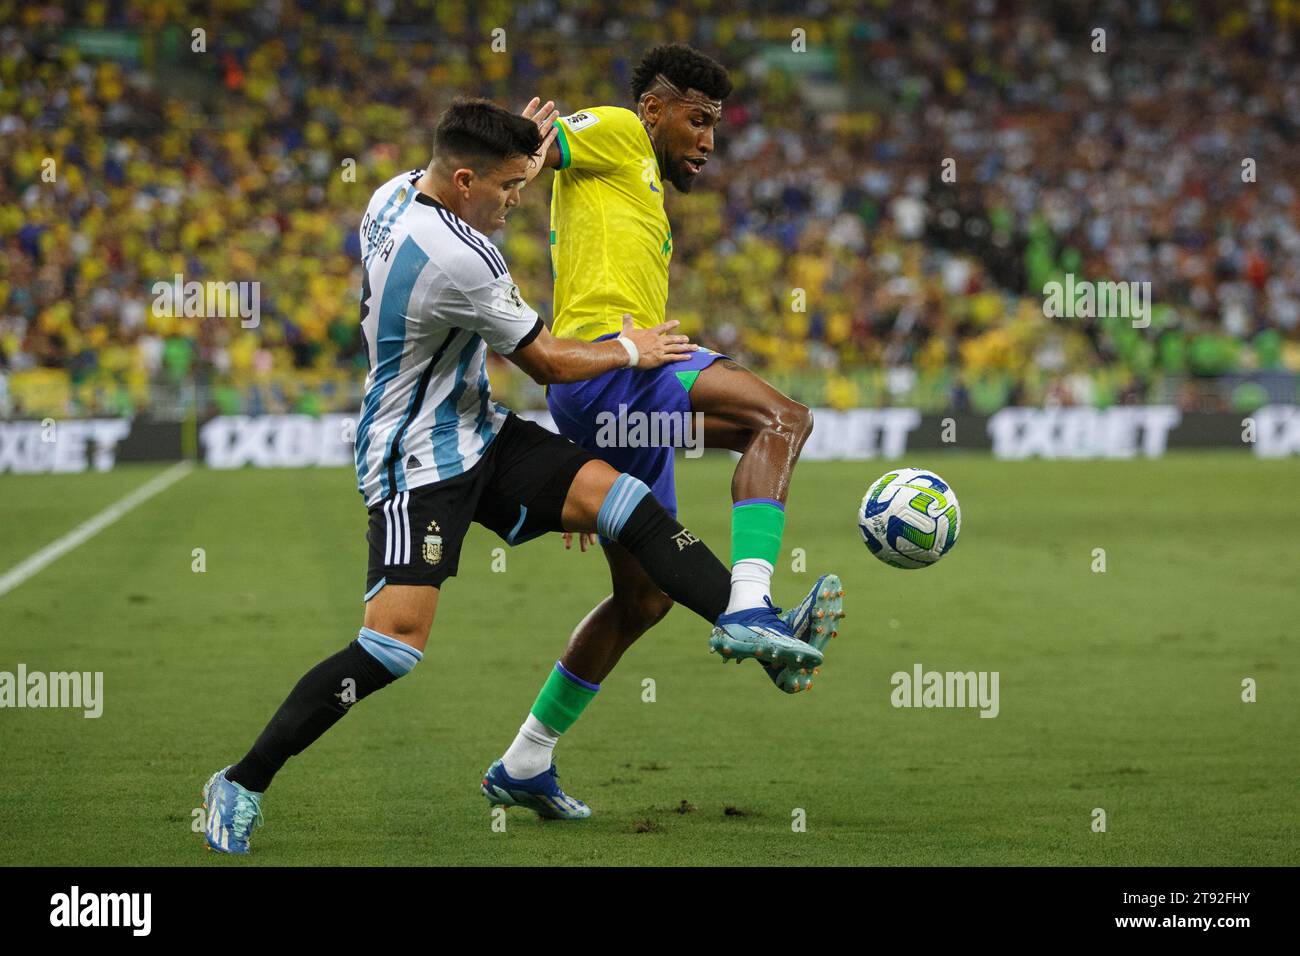 Rio De Janeiro, Brazil. 21st Nov, 2023. Emerson (R) of Brazil vies for the ball against Lautaro Martinez of Argentina during the 2026 World Cup qualifier match between Brazil and Argentina at the Maracana stadium in Rio de Janeiro, Brazil, on Nov. 21, 2023. Credit: Claudia Martini/Xinhua/Alamy Live News Stock Photo